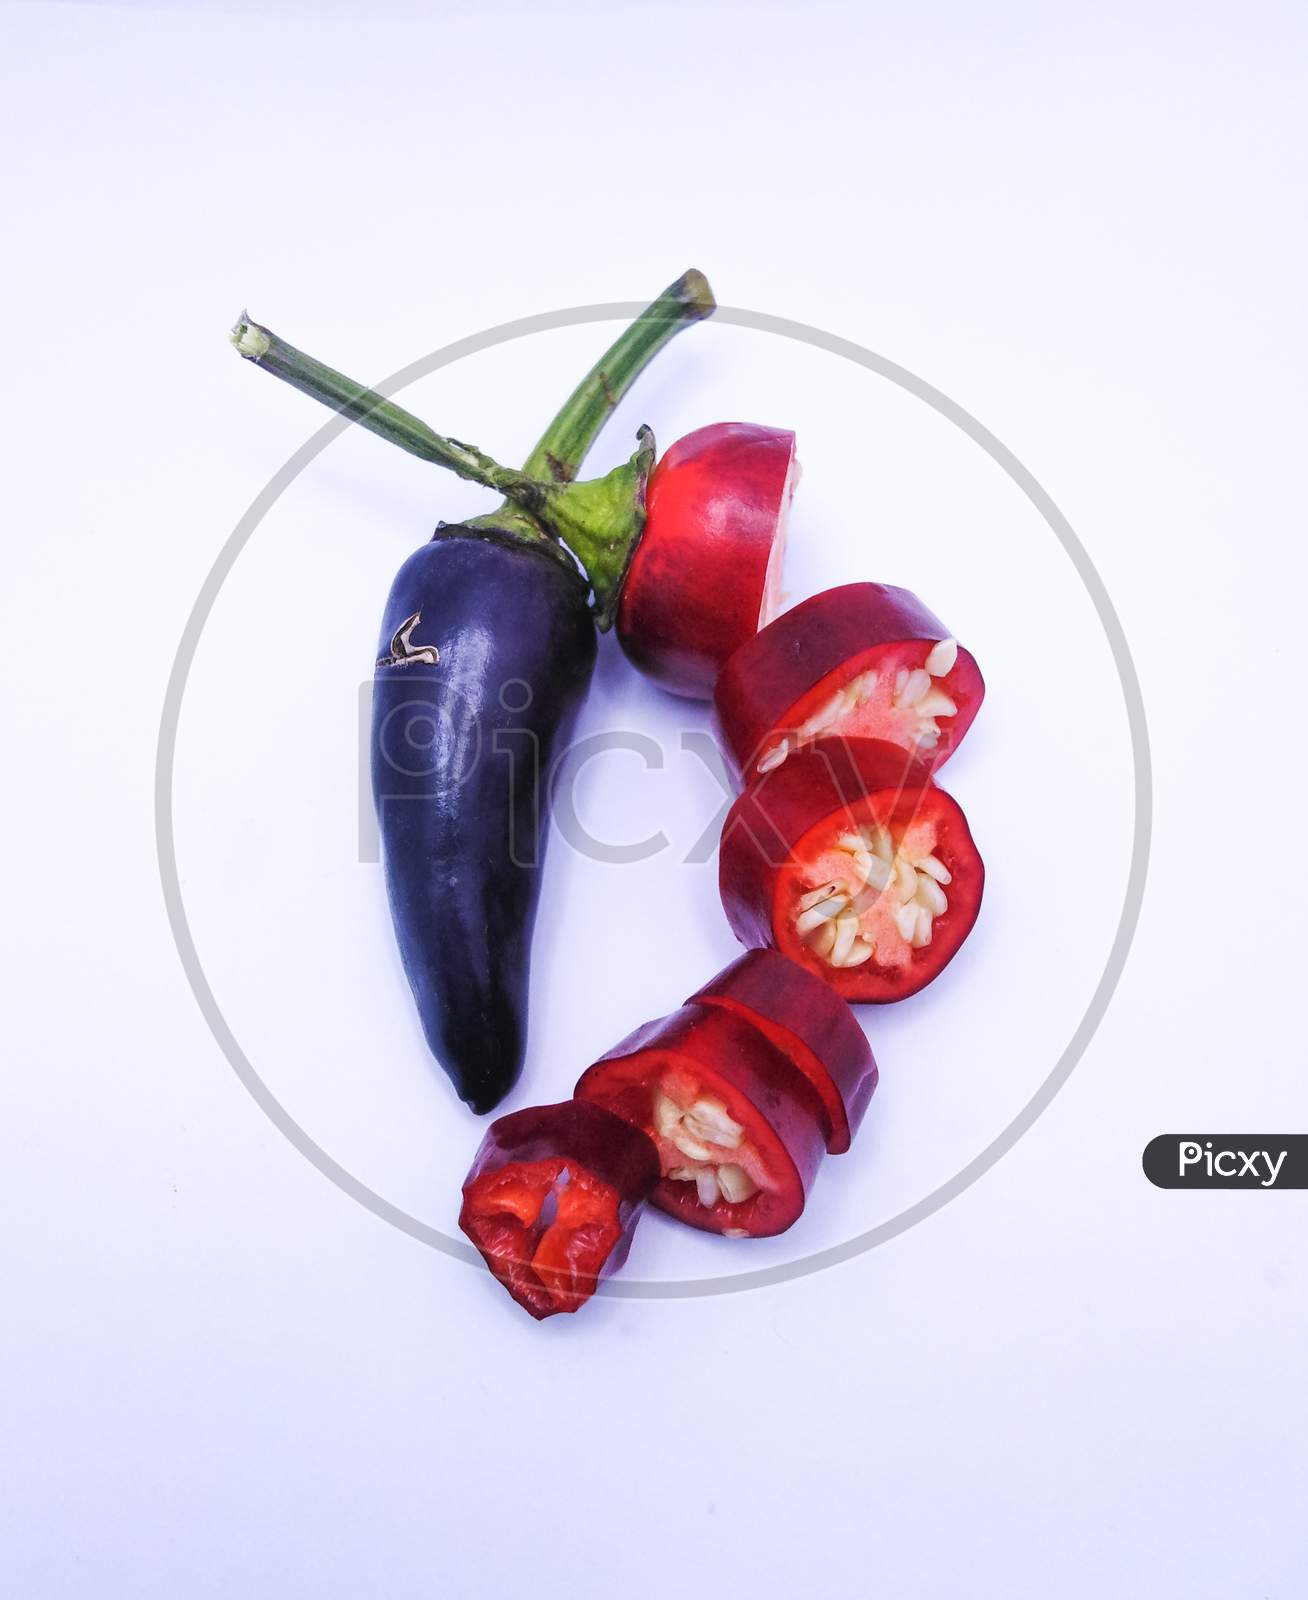 Black peppers flower plant background image